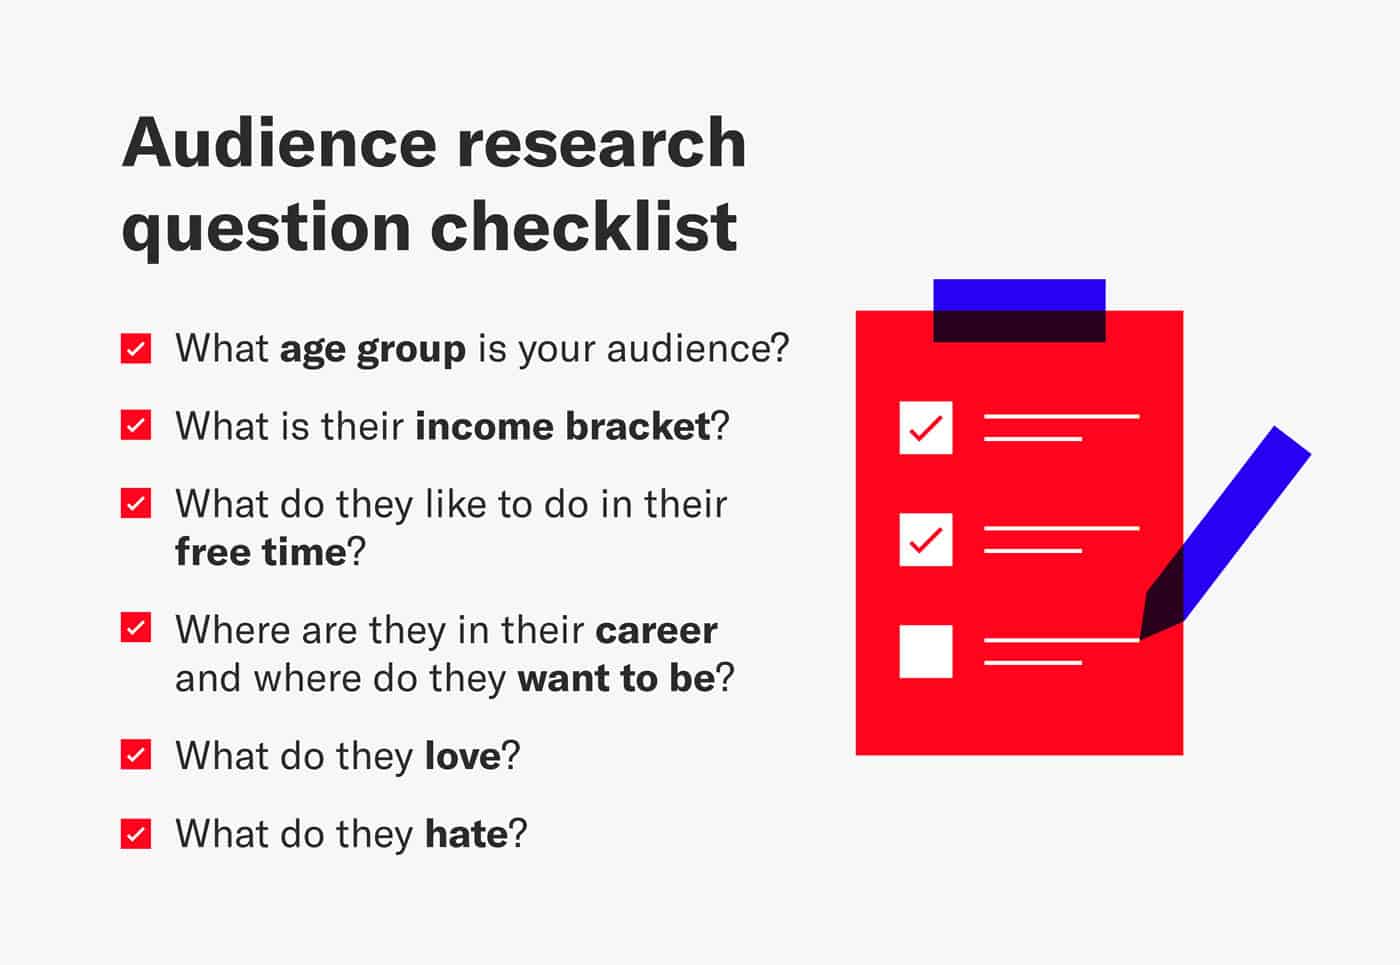 Checklist for audience research best practices